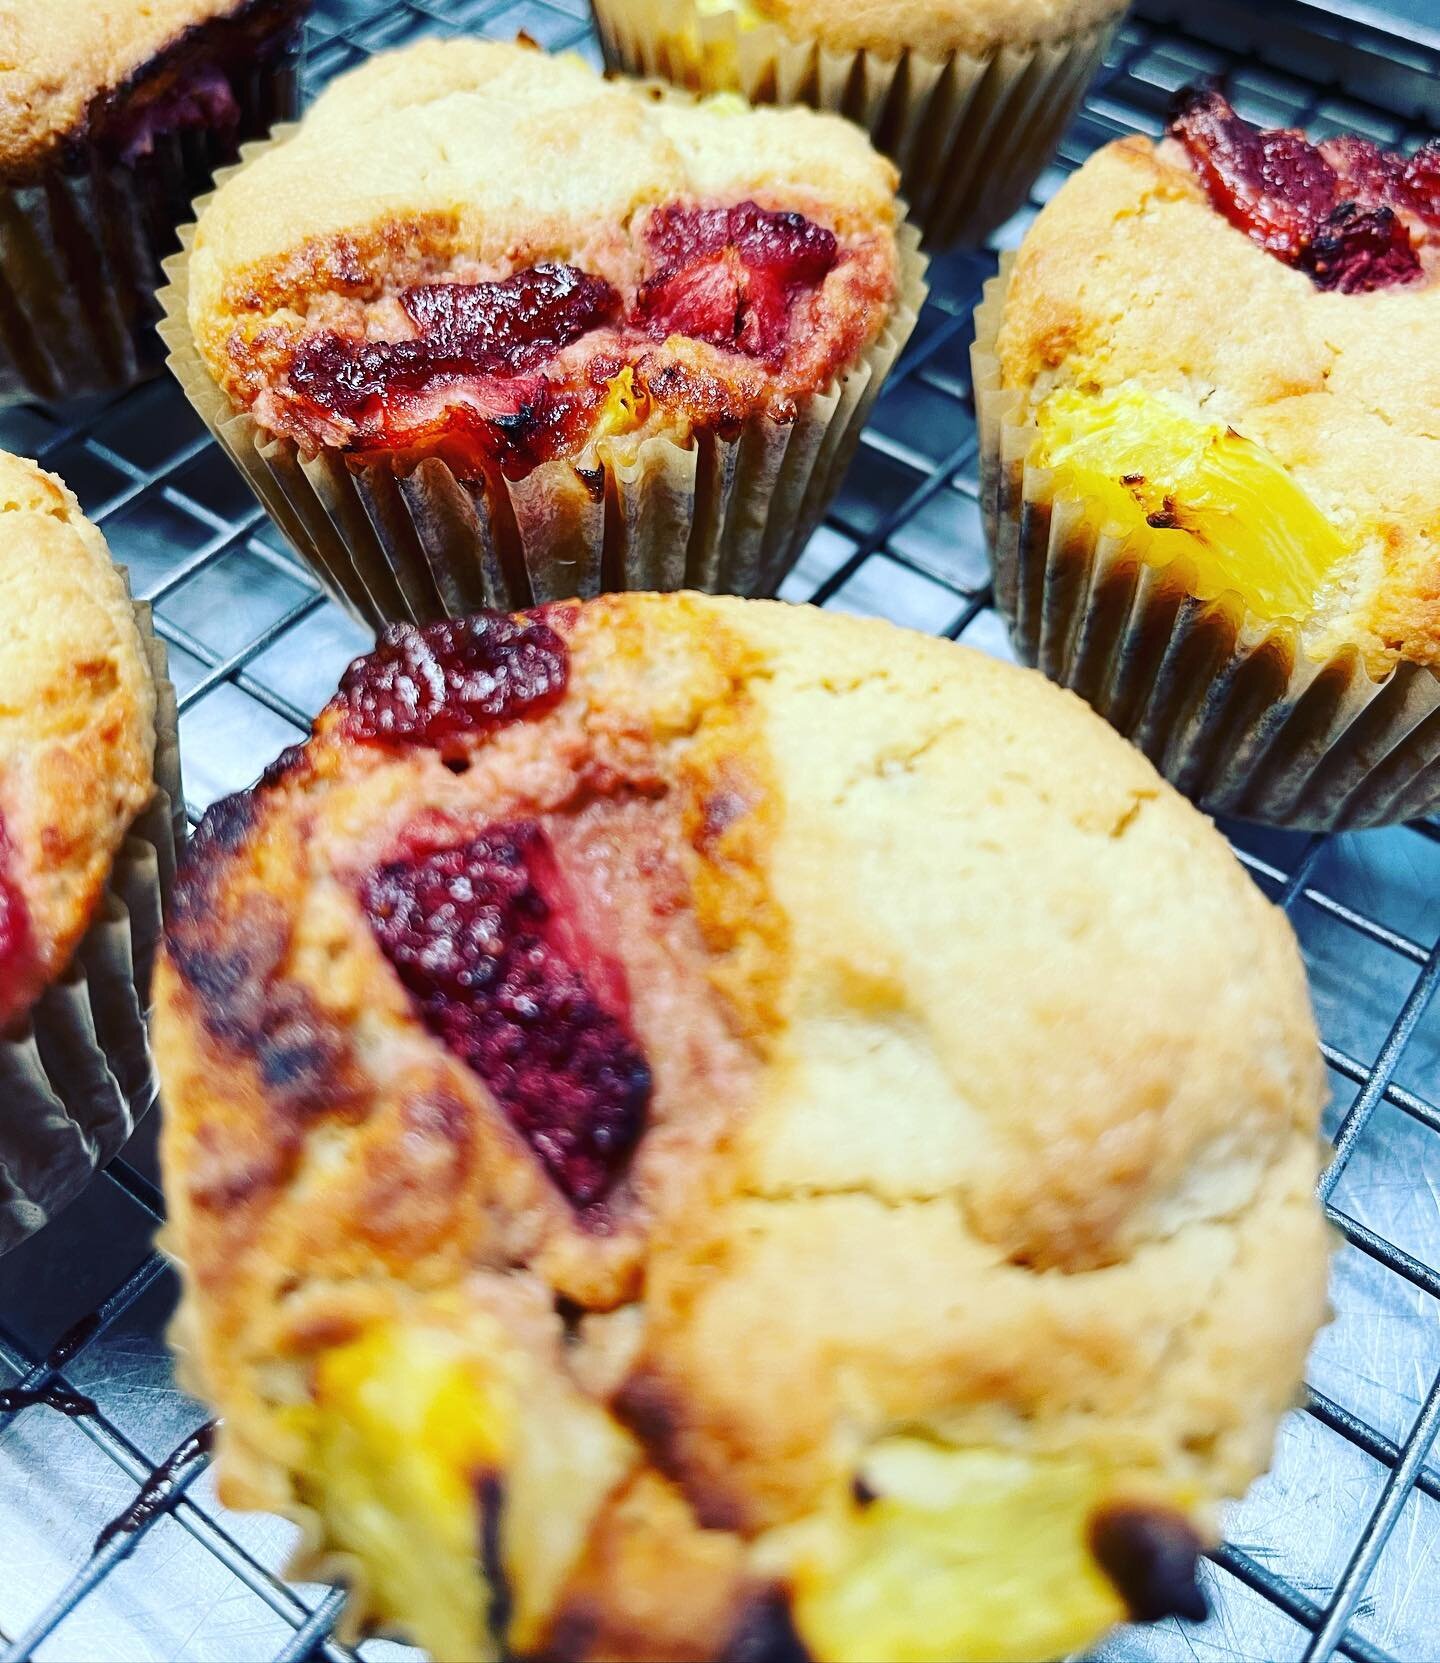 Vegan and Paleo Strawberry-Pineapple and Strawberry Muffins available now at OG Cocoa Village and Palm Bay. It&rsquo;s so yummy! 

We have Banana, strawberry-banana available in the bakery case as well!! 

Always Organic, Grain &amp; Gluten Free. 

O